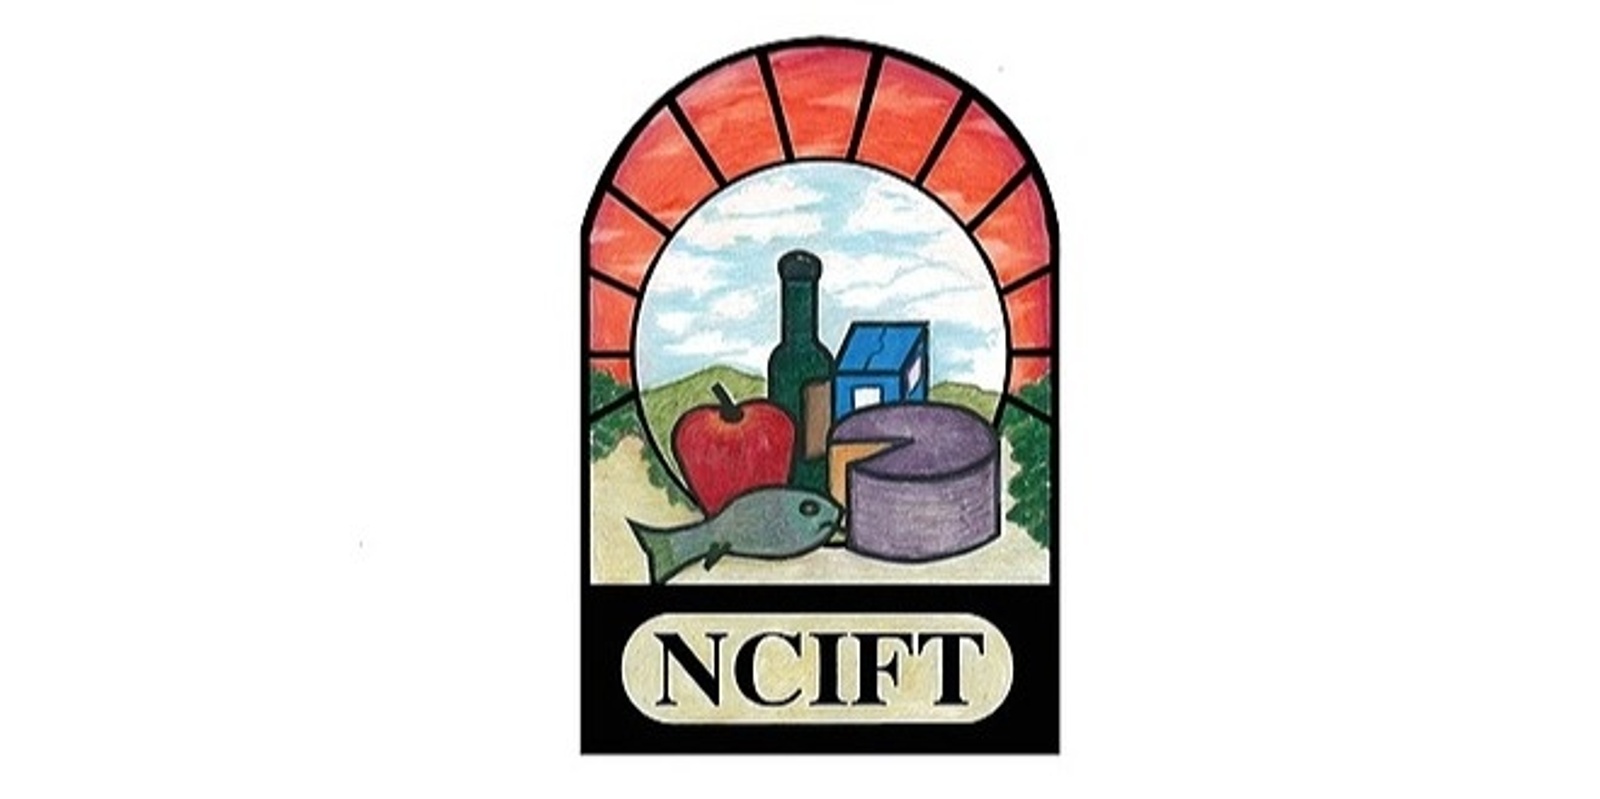 3rd Annual-NCIFT Sierra Region Industrial Food Professionals Networking Event! 